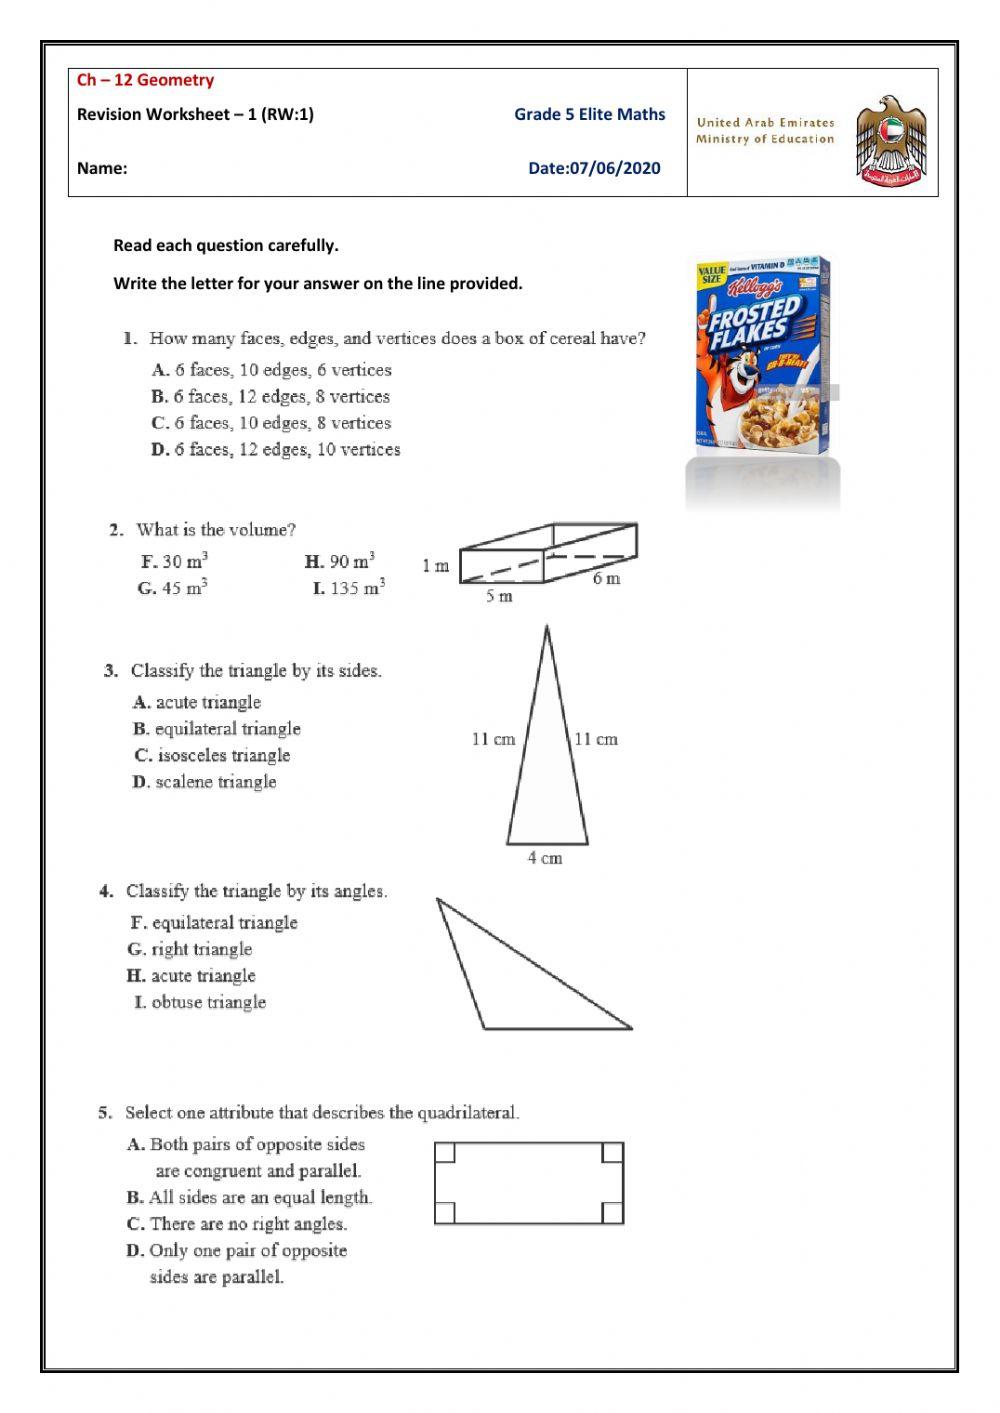 Revision Worksheet - 1 on Ch-12 Geometry